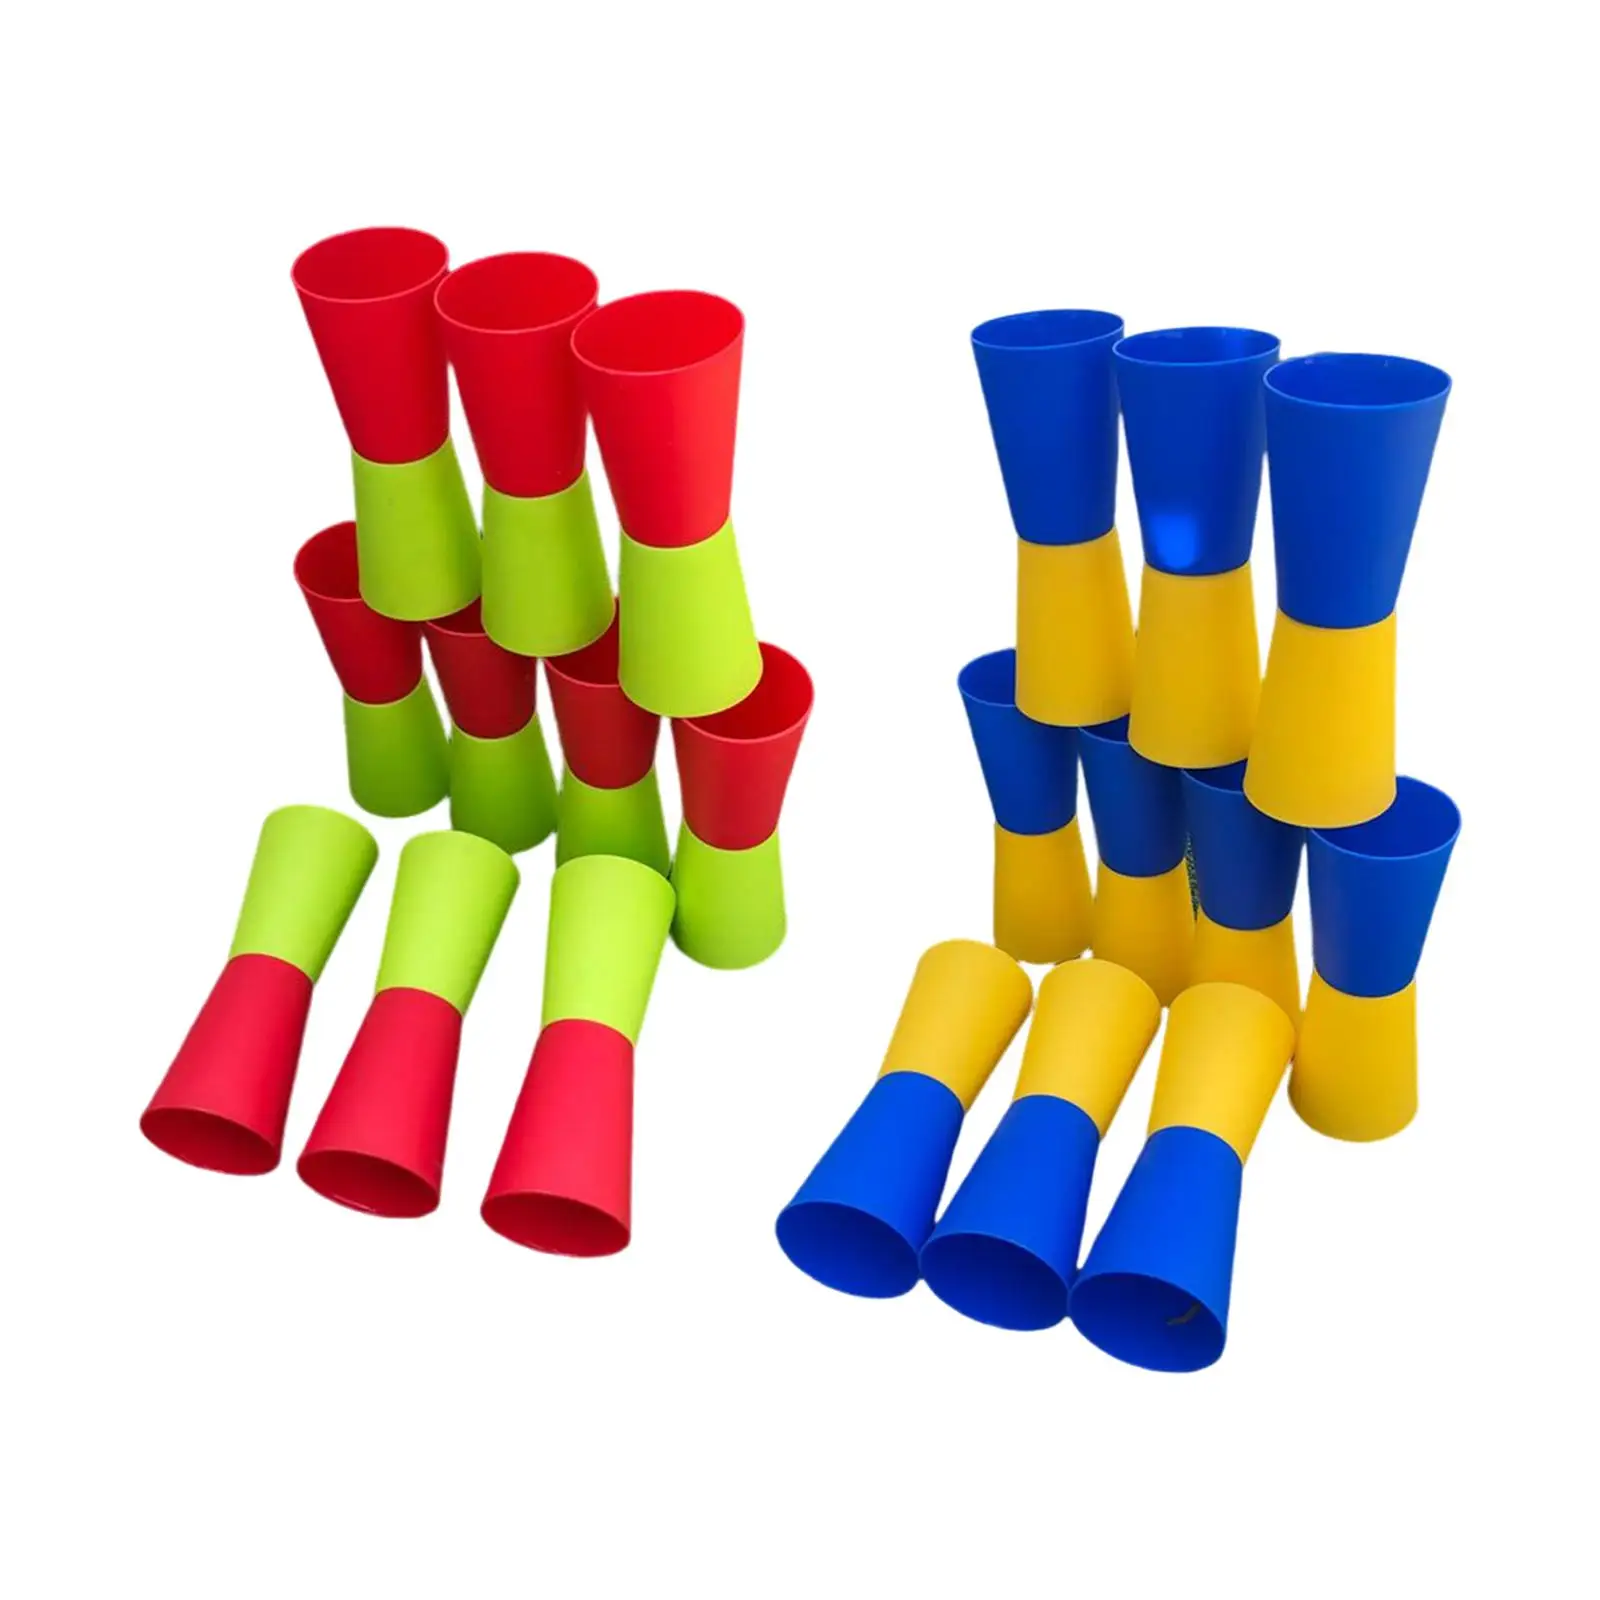 10x Flip Cups Agility Training Fitness Running Exercise Sensory Integration Reversed Cups for Activity Festive Indoor